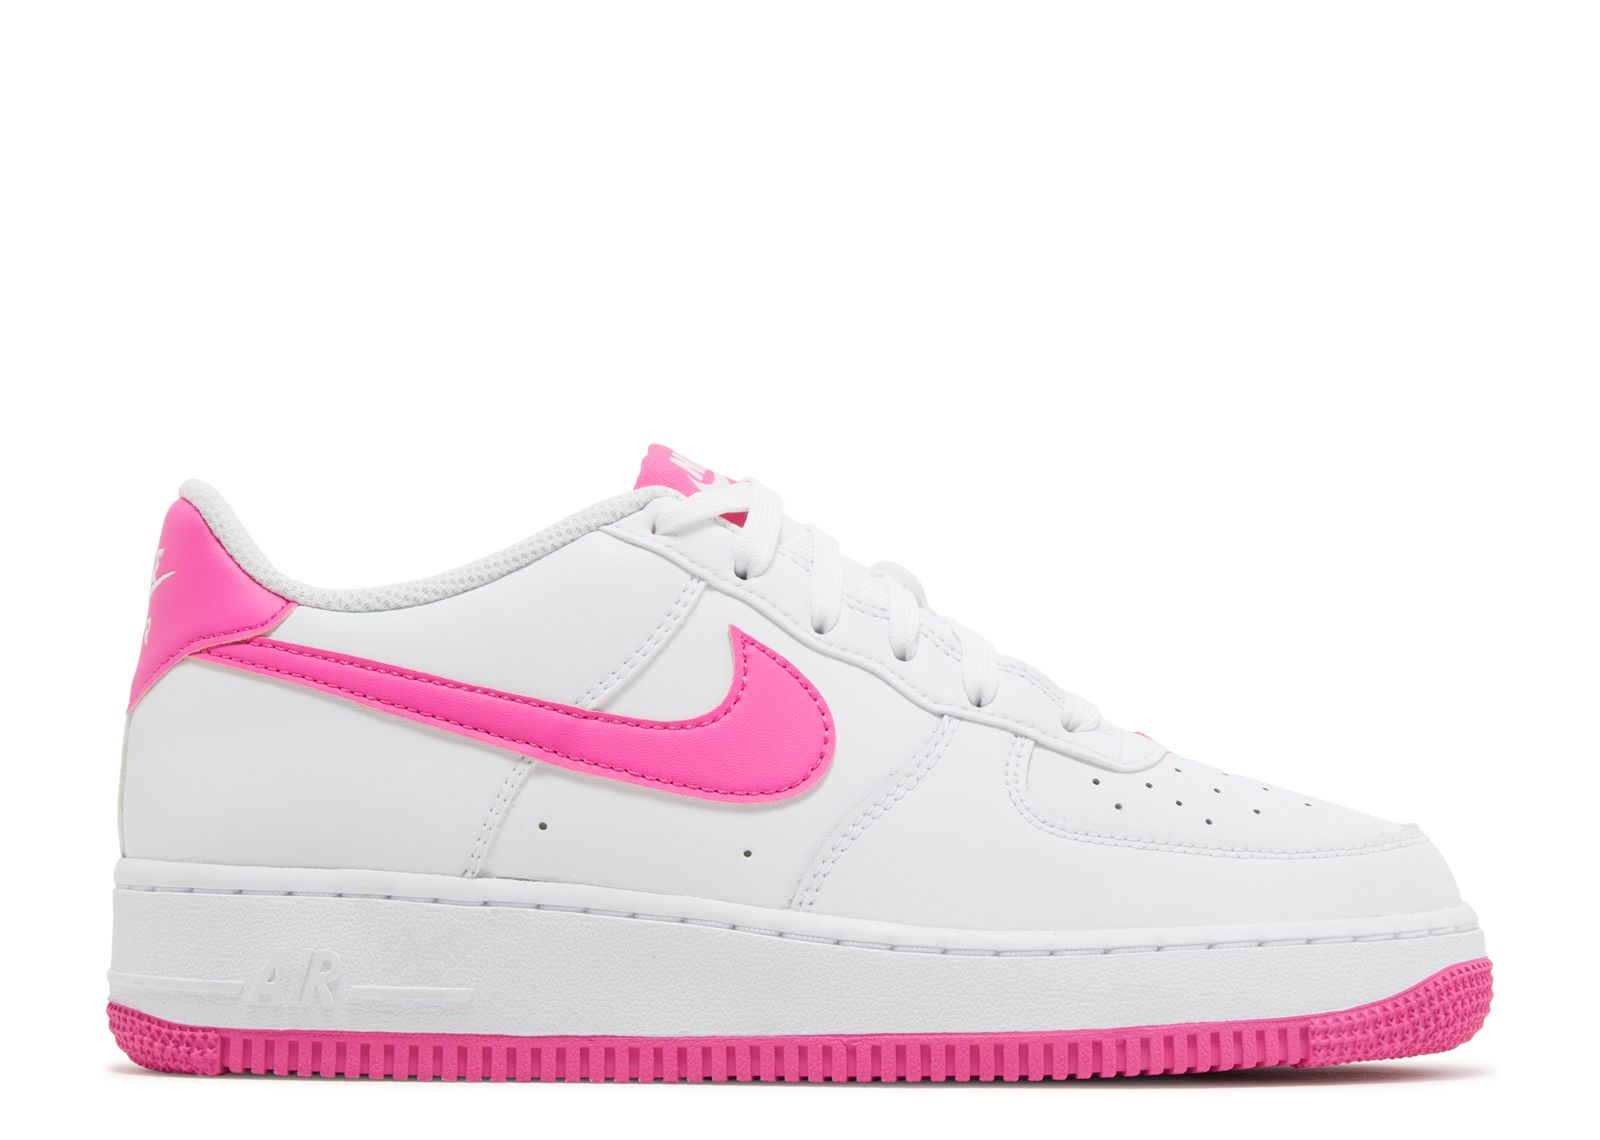 Кроссовки Nike Air Force 1 Gs 'White Laser Fuchsia', белый new nike air force 1 script swoosh women white skateboarding shoes original light weight outdoor sports sneakers